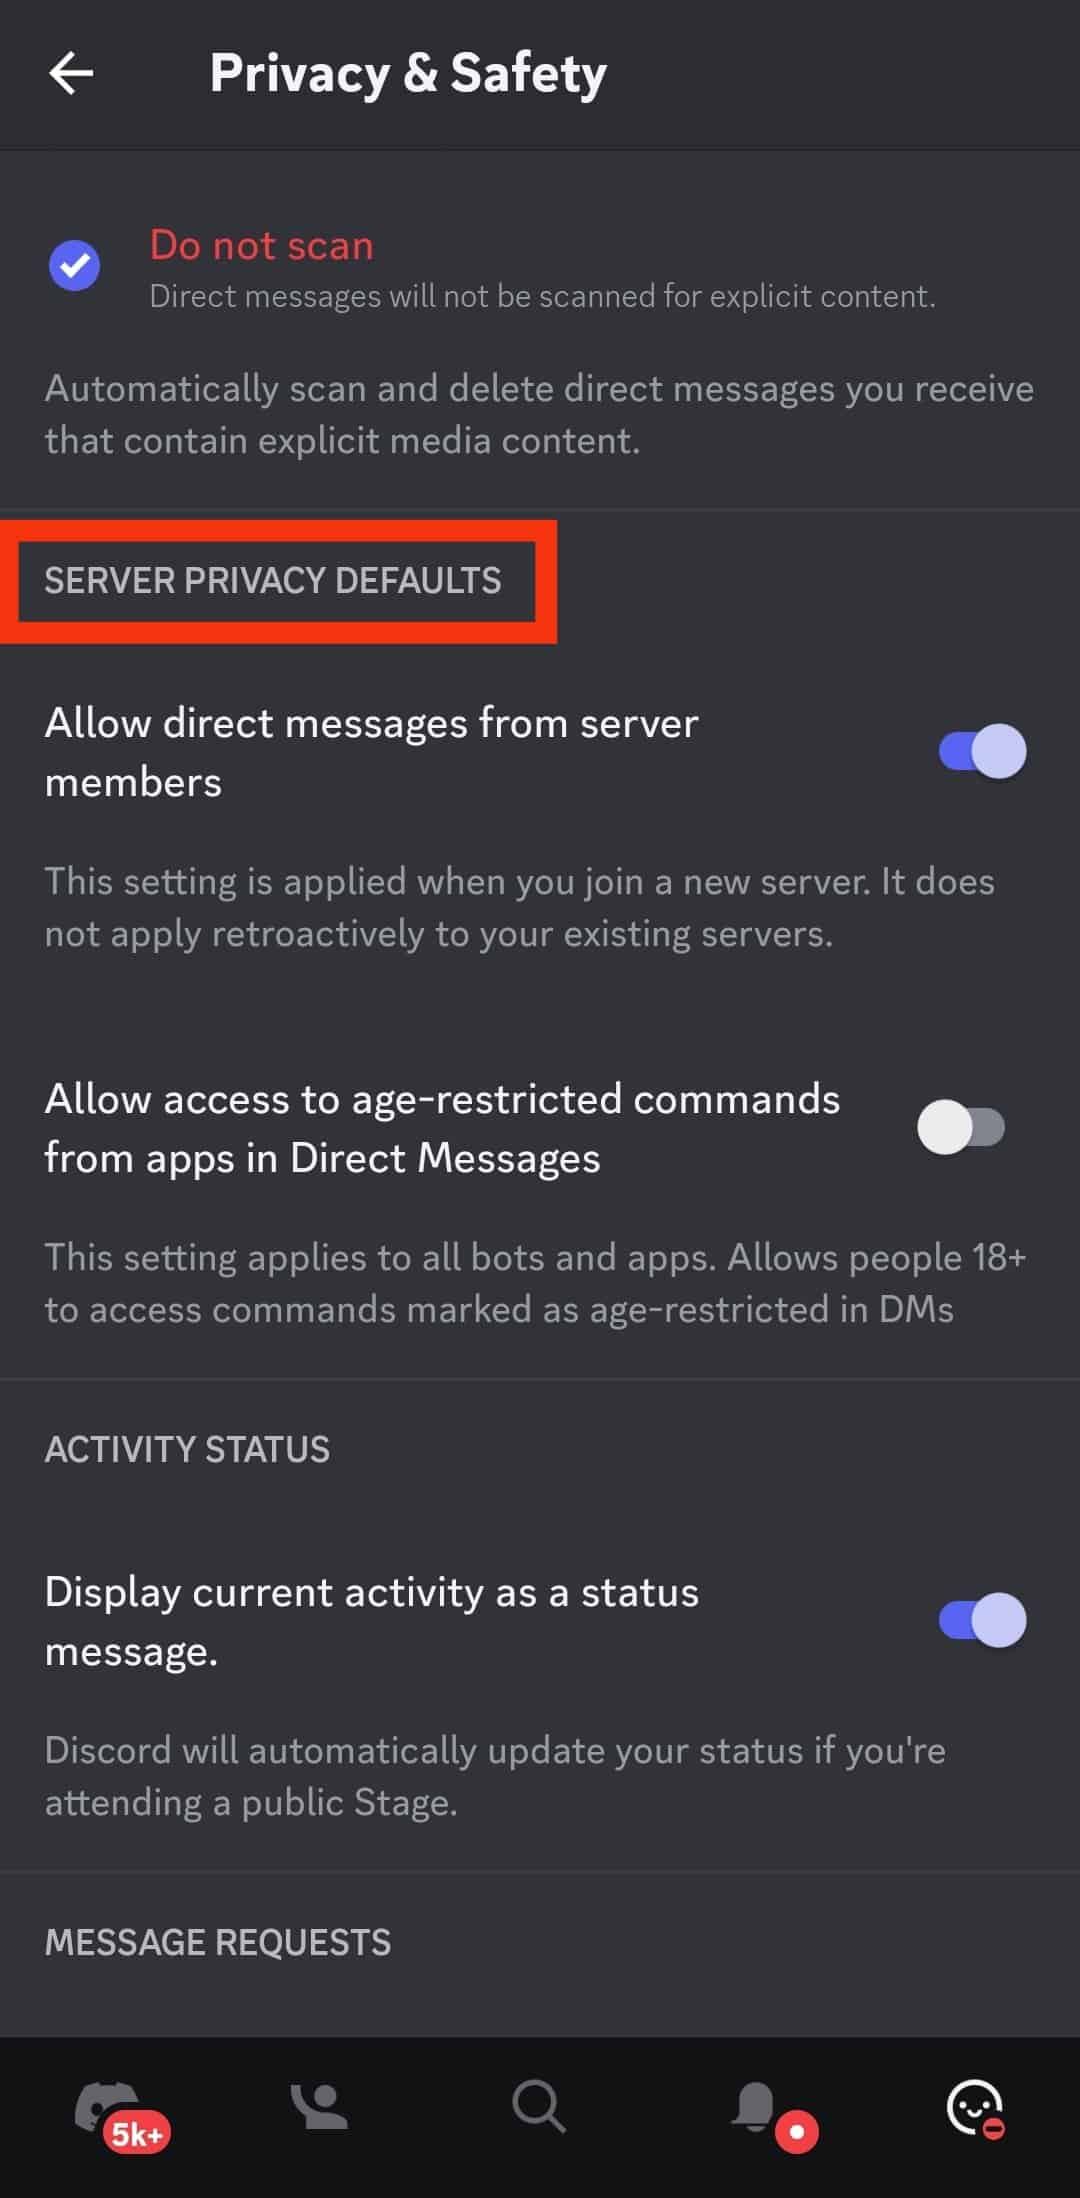 Move To The Server Privacy Defaults